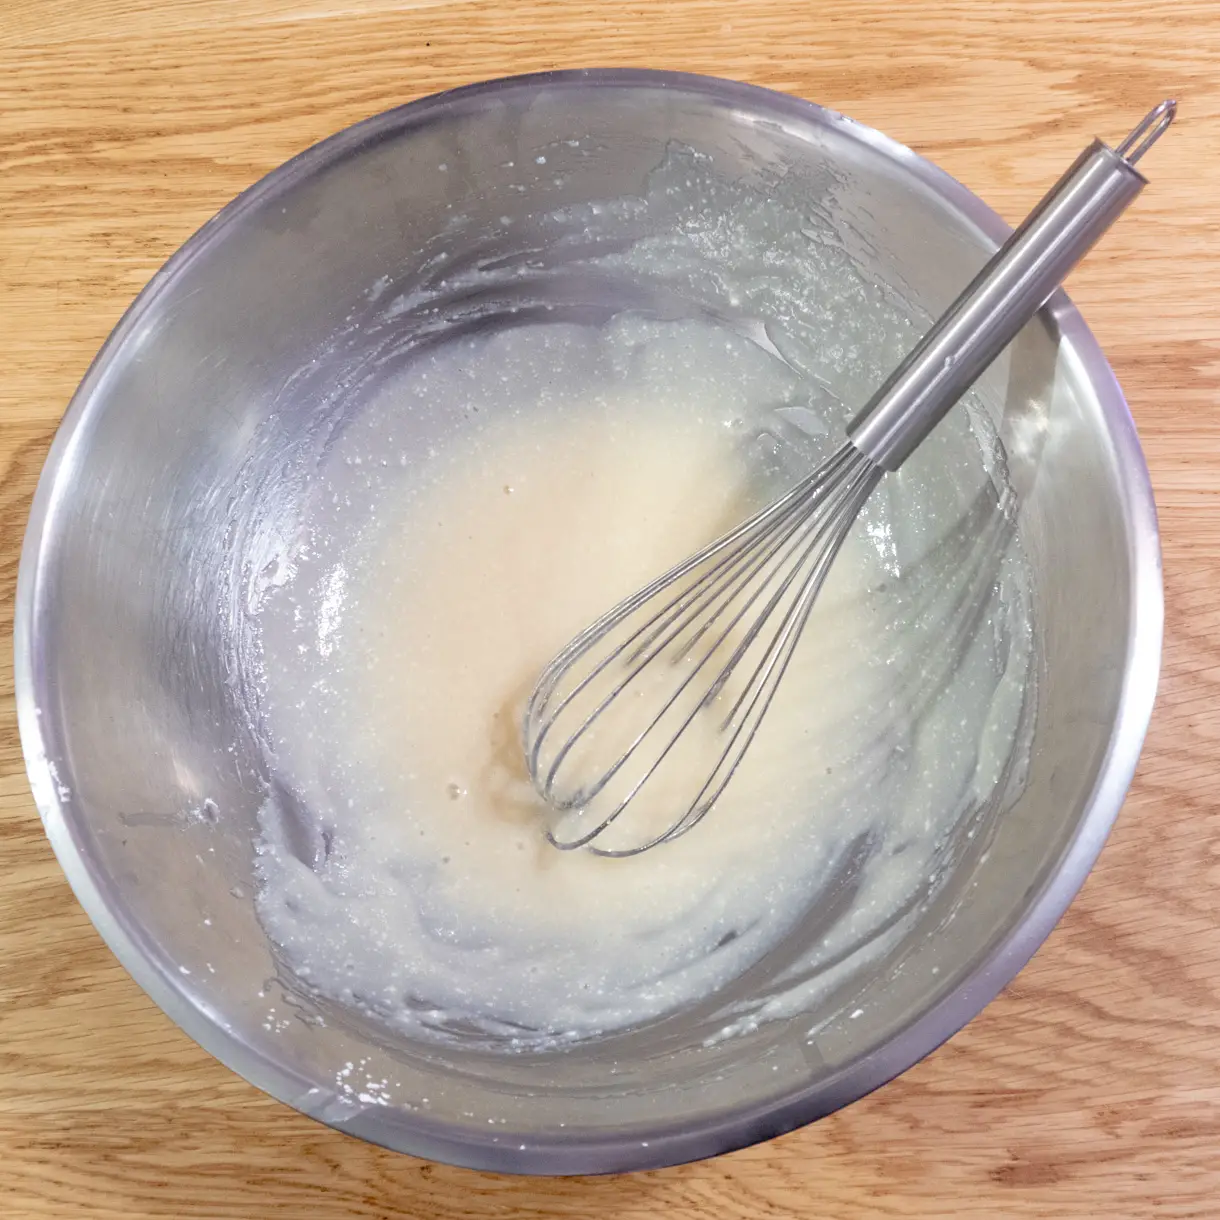 Tofu and powdered sugar whisked together in a large metallic mixing bowl until smooth.